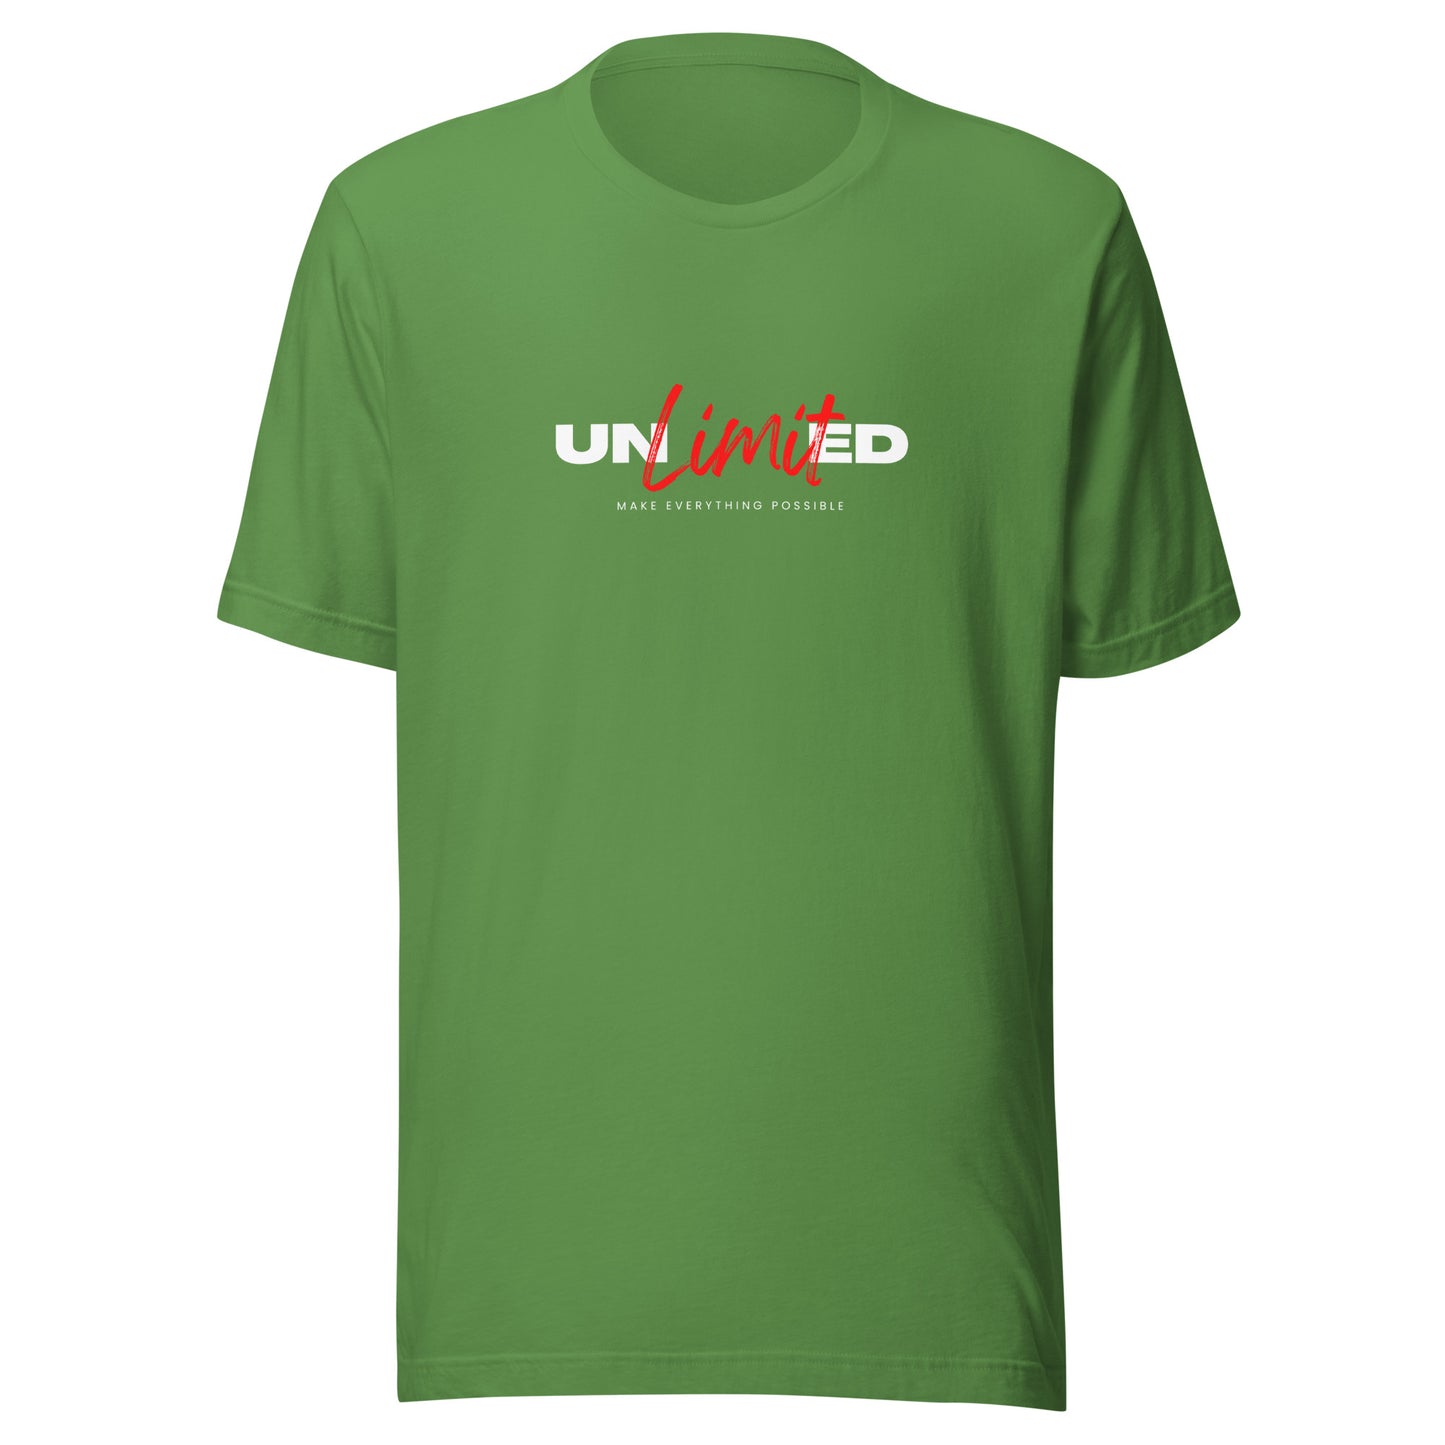 Unlimited t-shirt